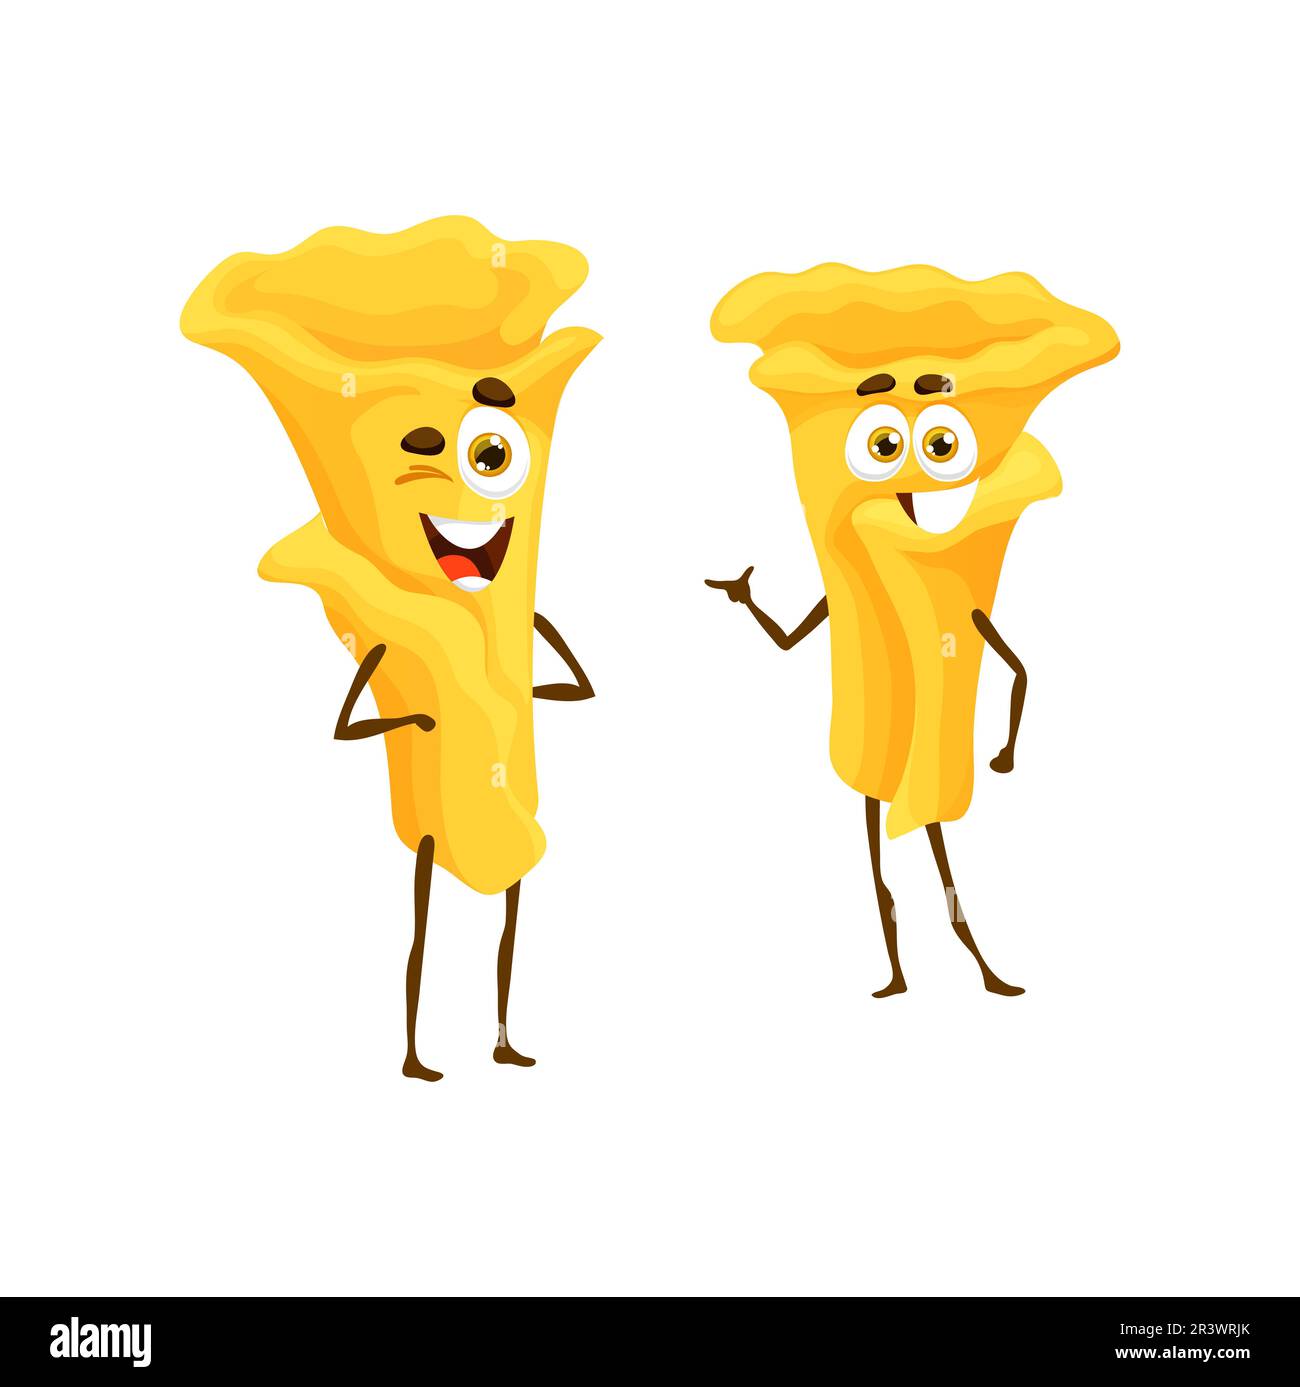 https://c8.alamy.com/comp/2R3WRJK/cartoon-italian-pasta-characters-winking-with-cute-smiling-faces-funny-vector-personages-of-italy-cuisine-food-happy-campanelle-pasta-emojis-wheat-dough-meal-italian-food-emoticons-2R3WRJK.jpg